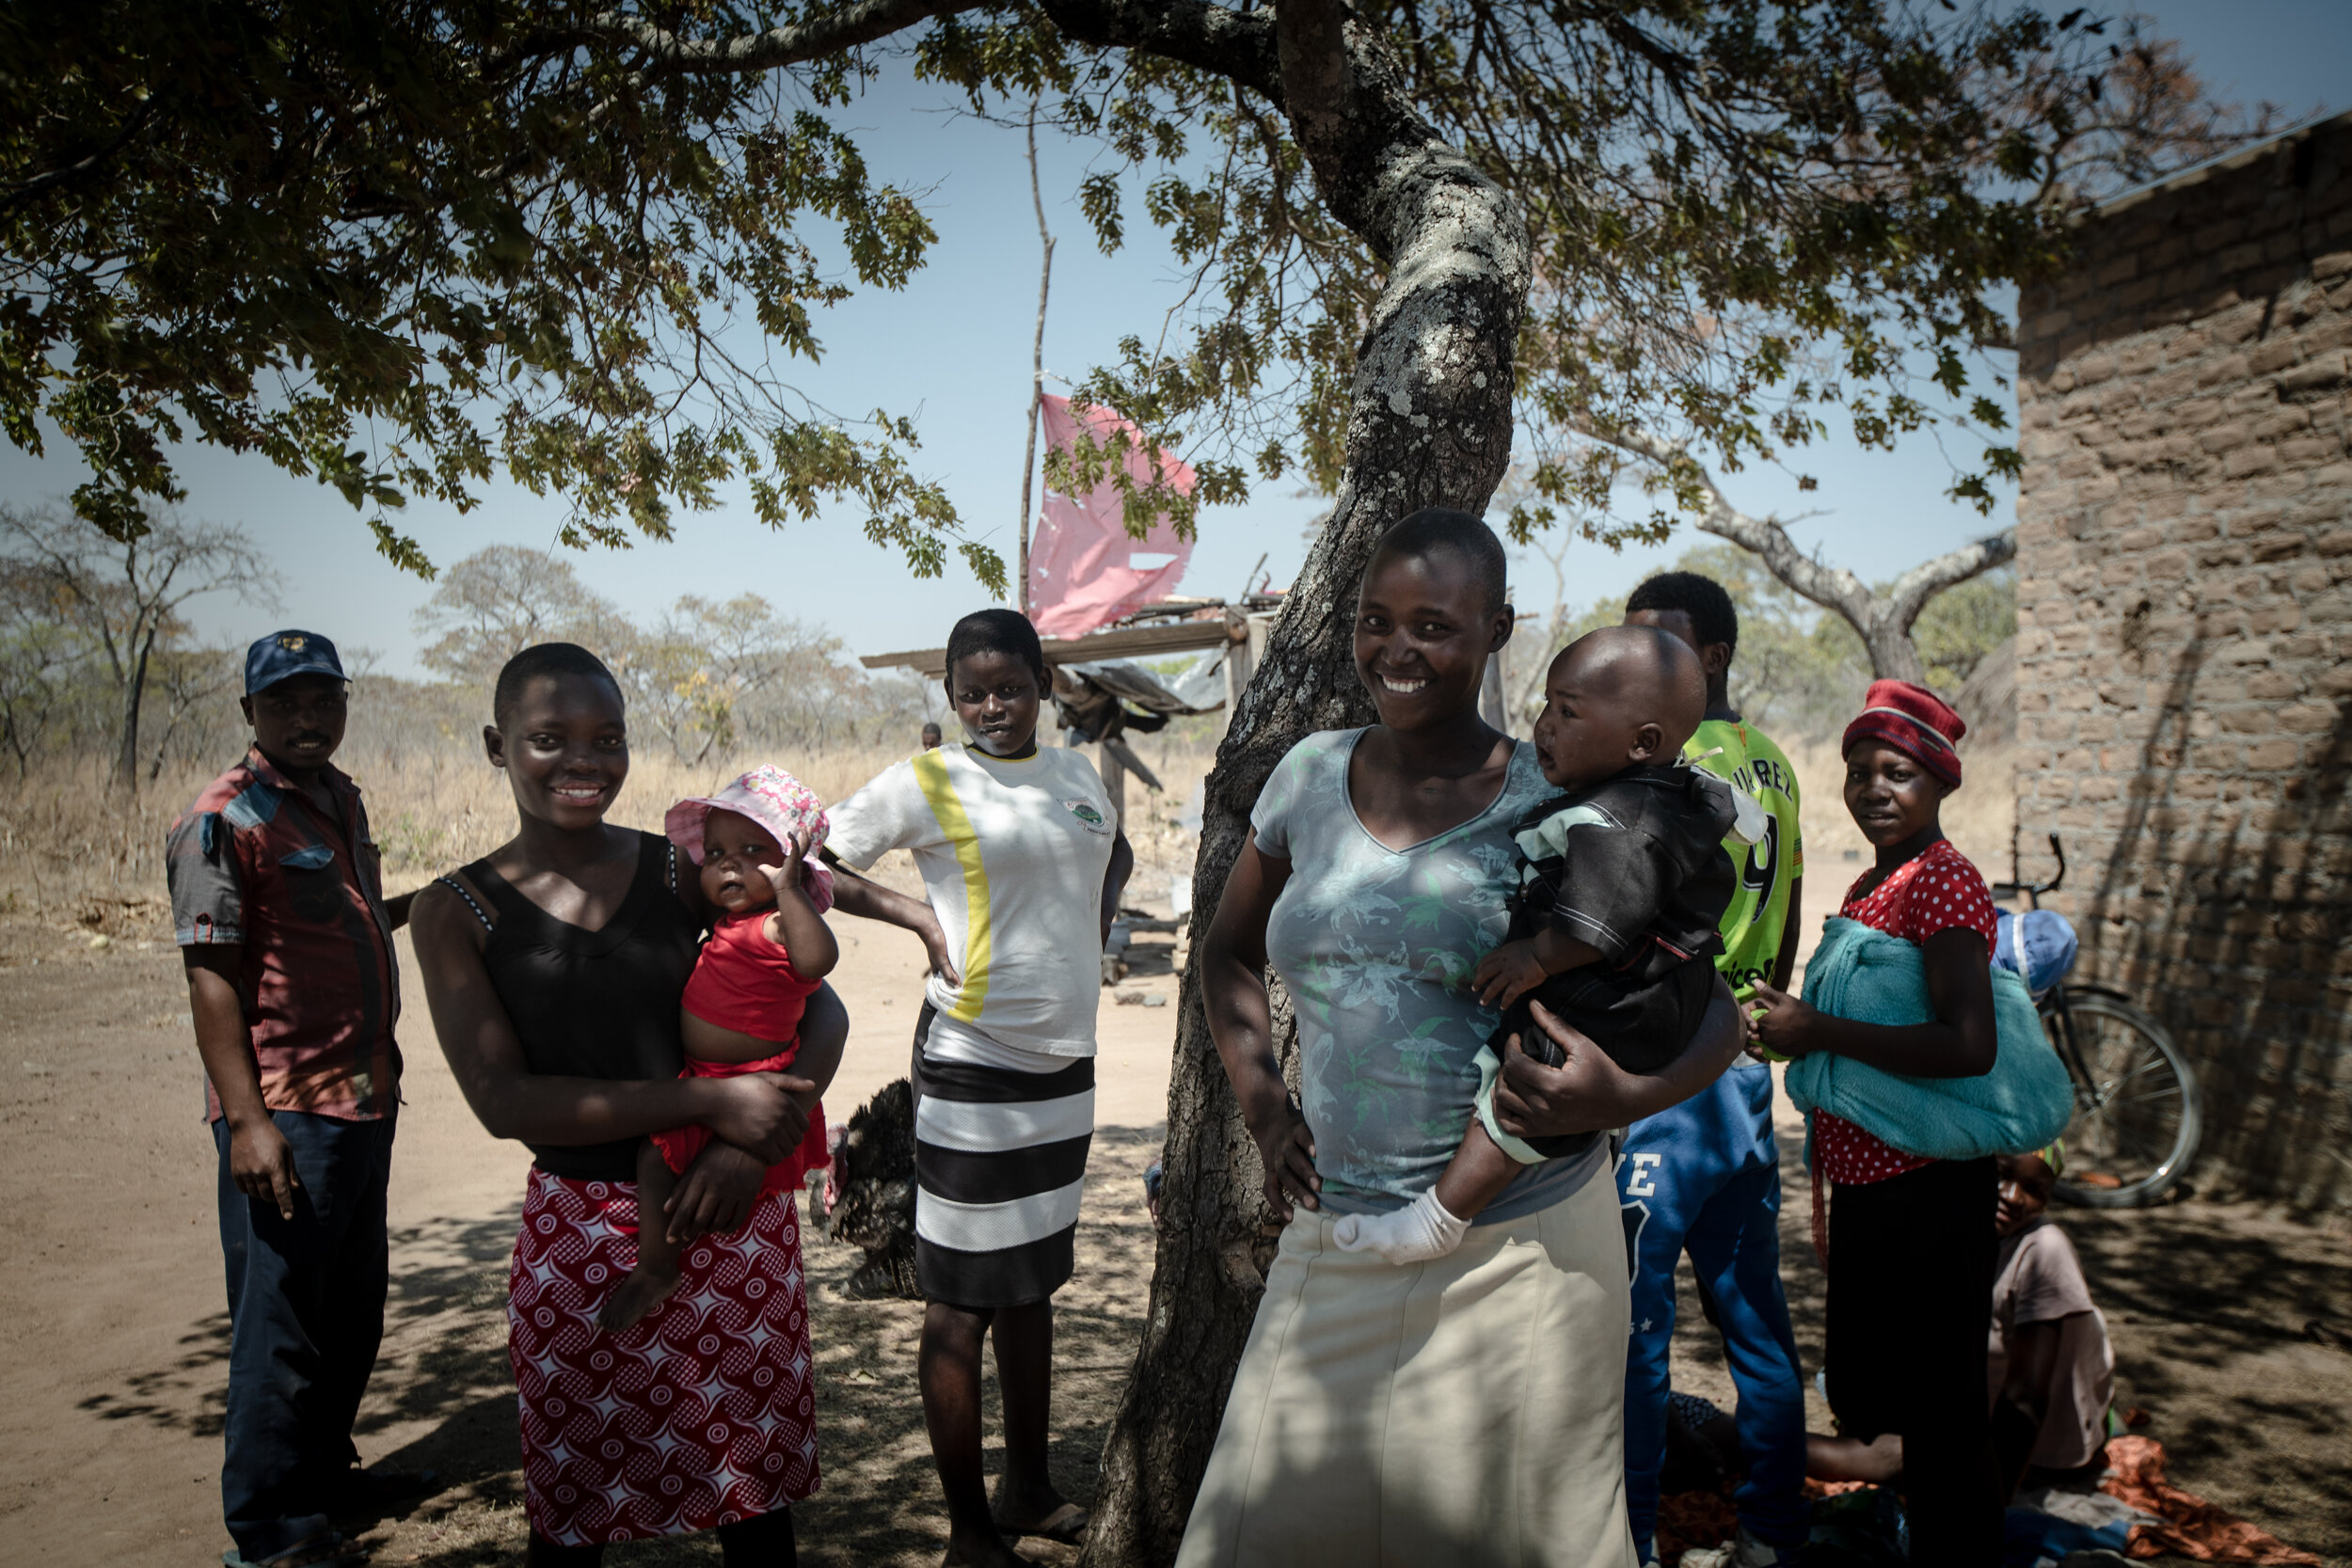  Beknown and Mediator with their children and relatives in front of their family house in Chisungo, Zimbabwe, 2019 